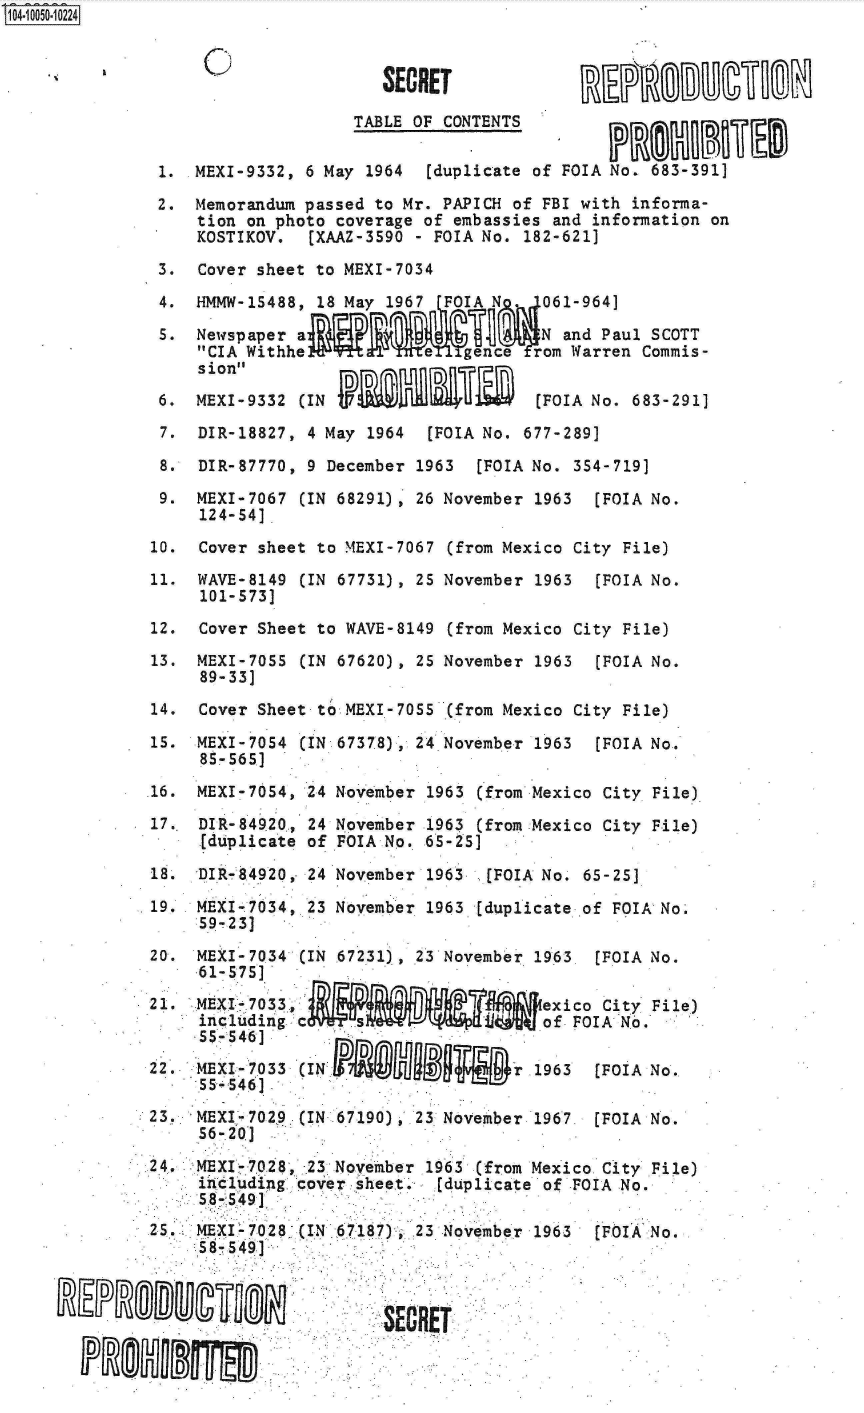 handle is hein.jfk/jfkarch00003 and id is 1 raw text is: 104-10050-10224



                                      SECRET

                                    TABLE OF CONTENTS


                1. MEXI-9332,  6 May 1964  [duplicate of FOIA No. 683-391)

                2. Memorandum  passed to Mr. PAPICH of FBI with informa-
                   tion  on photo coverage of embassies and information on
                   KOSTIKOV.   [XAAZ-3590 - FOIA No. 182-621]

               3.   Cover sheet to MEXI-7034

               4.  HMMW-15488,  18 May 1967  FOIA N    061-964]

               S.  Newspaper  a                        N and Paul SCOTT
                   CIA Withhe             e   gence  rom Warren Commis-
                   sion

                6. MEXI-9332  (IN                     [FOIA No. 683-291]

                7.  DIR-18827, 4 May 1964  [FOXA No. 677-289]

                8.  DIR-87770, 9 December 1963  [FOIA No. 354-719]

                9. MEXI-7067  (IN 68291), 26 November 1963  [FOIA No.
                    124-54]

               10.  Cover sheet to MEXI-7067 (from Mexico City File)

               11. WAVE-8149  (IN 67731), 25 November 1963  [FOIA No.
                    101-573]

               12.  Cover Sheet to WAVE-8149 (from Mexico City File)

               13. MEXI-70S5  (IN 67620), 25 November 1963  [FOIA No.
                    89-33]

               14.  Cover Sheet to MEXI-7055 (from Mexico City File)

               15. MEXI-7054  (IN 67378), 24 November 1963  [FOIA No.
                    85-565]

              16.  MEXI-7054,  24 November 1963 (from Mexico City File)

              17.,  DIR-84920., 24 November 1963 (from Mexico City File)
                    [duplicate of FOIA No. 65-25]
               18.  DIR-84920, 24 November 1963  [FOIA No. 65-25]

               19. MEXI-7034,  23 November 1963 [duplicate of FOIA No.
                    59-23]

               20. MEXI-7034  (IN 67231), 23 November 1963  (FOIA No.
                    61-575]
                  21 EI733,                            exico City File)
               21 . '.E XI ,.7 3                         i.
                    includin  c.
                    55-546]
               22. MEXI-7033  (IN                   r 1963
                    55- 546]
               23. MEXI-7029  (IN 67190), 23 November 1967  (FOIA No.

               2 4.*MEXI-728,-.23. November 1963 (from Mexico City File)
                    including. pover sheet, (duplicate of FOIA No.

               24. MEXI-  028(IN.67187)   23 November 1963 e oi No.
                    5 8 5 49]
                    58-549


